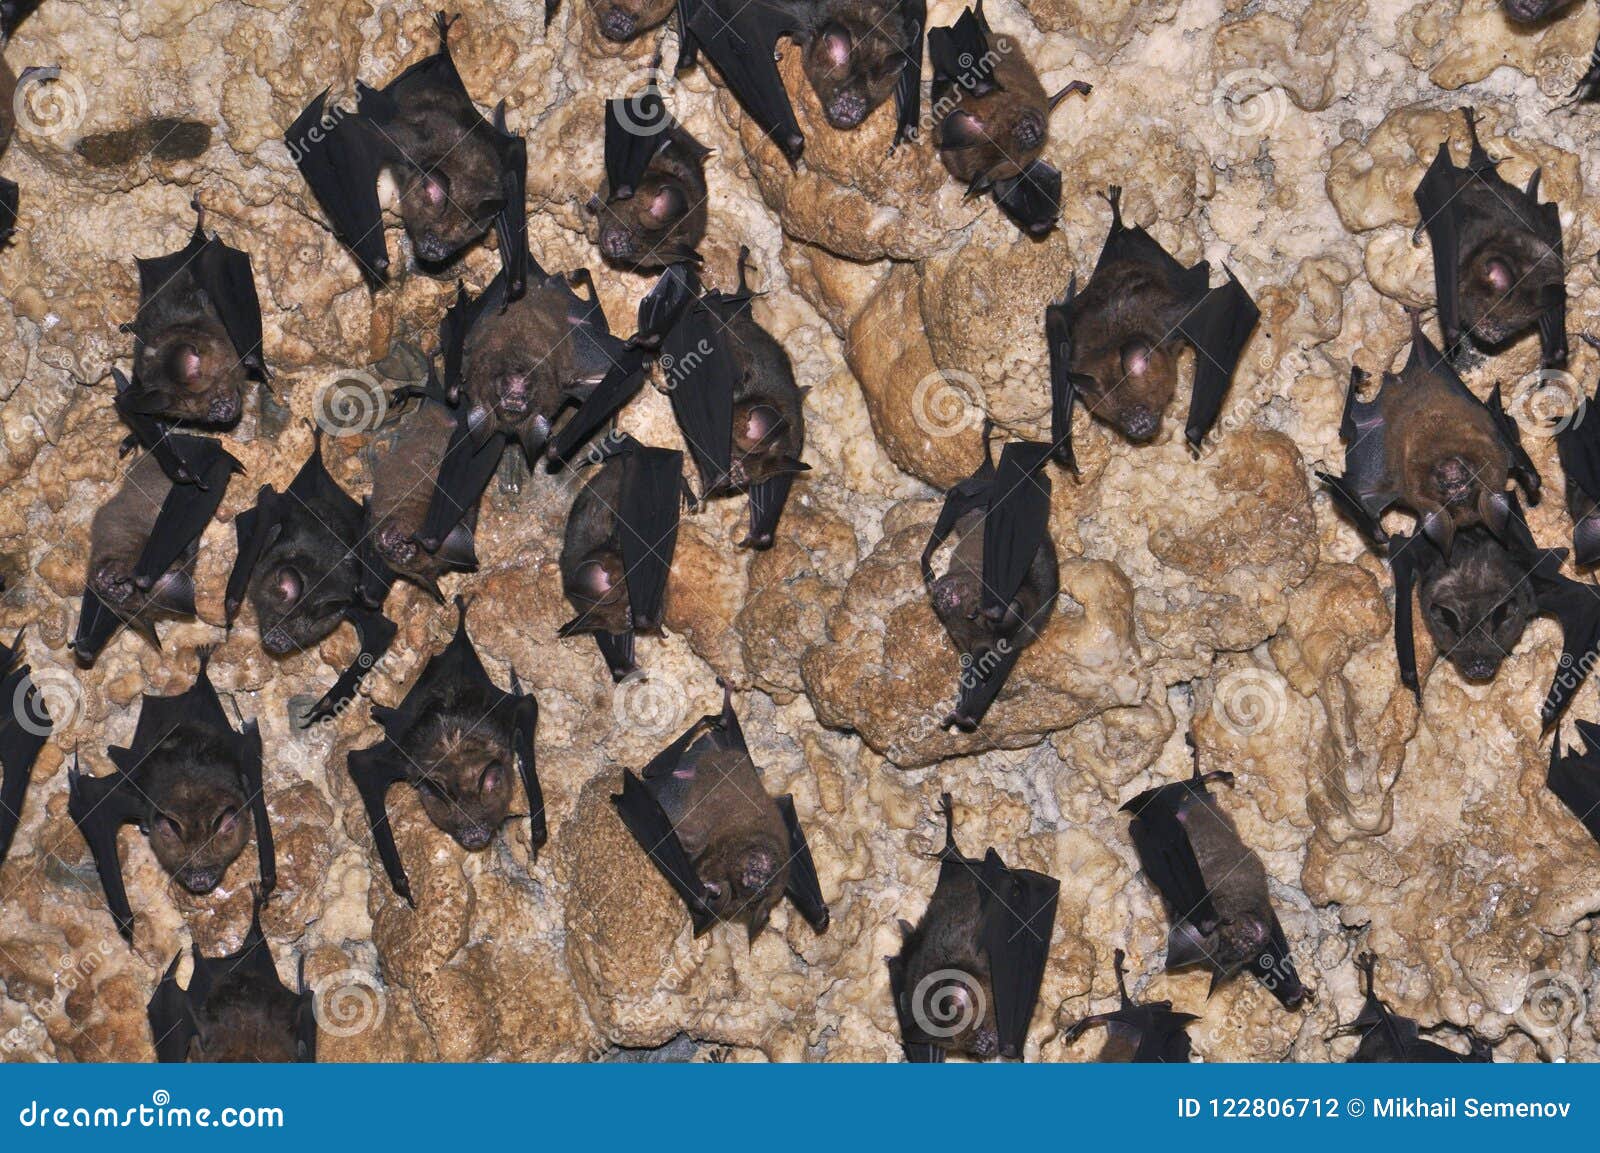 Bats On The Ceiling Of The Cave Of Bats In The Vicinity Of Pokhara